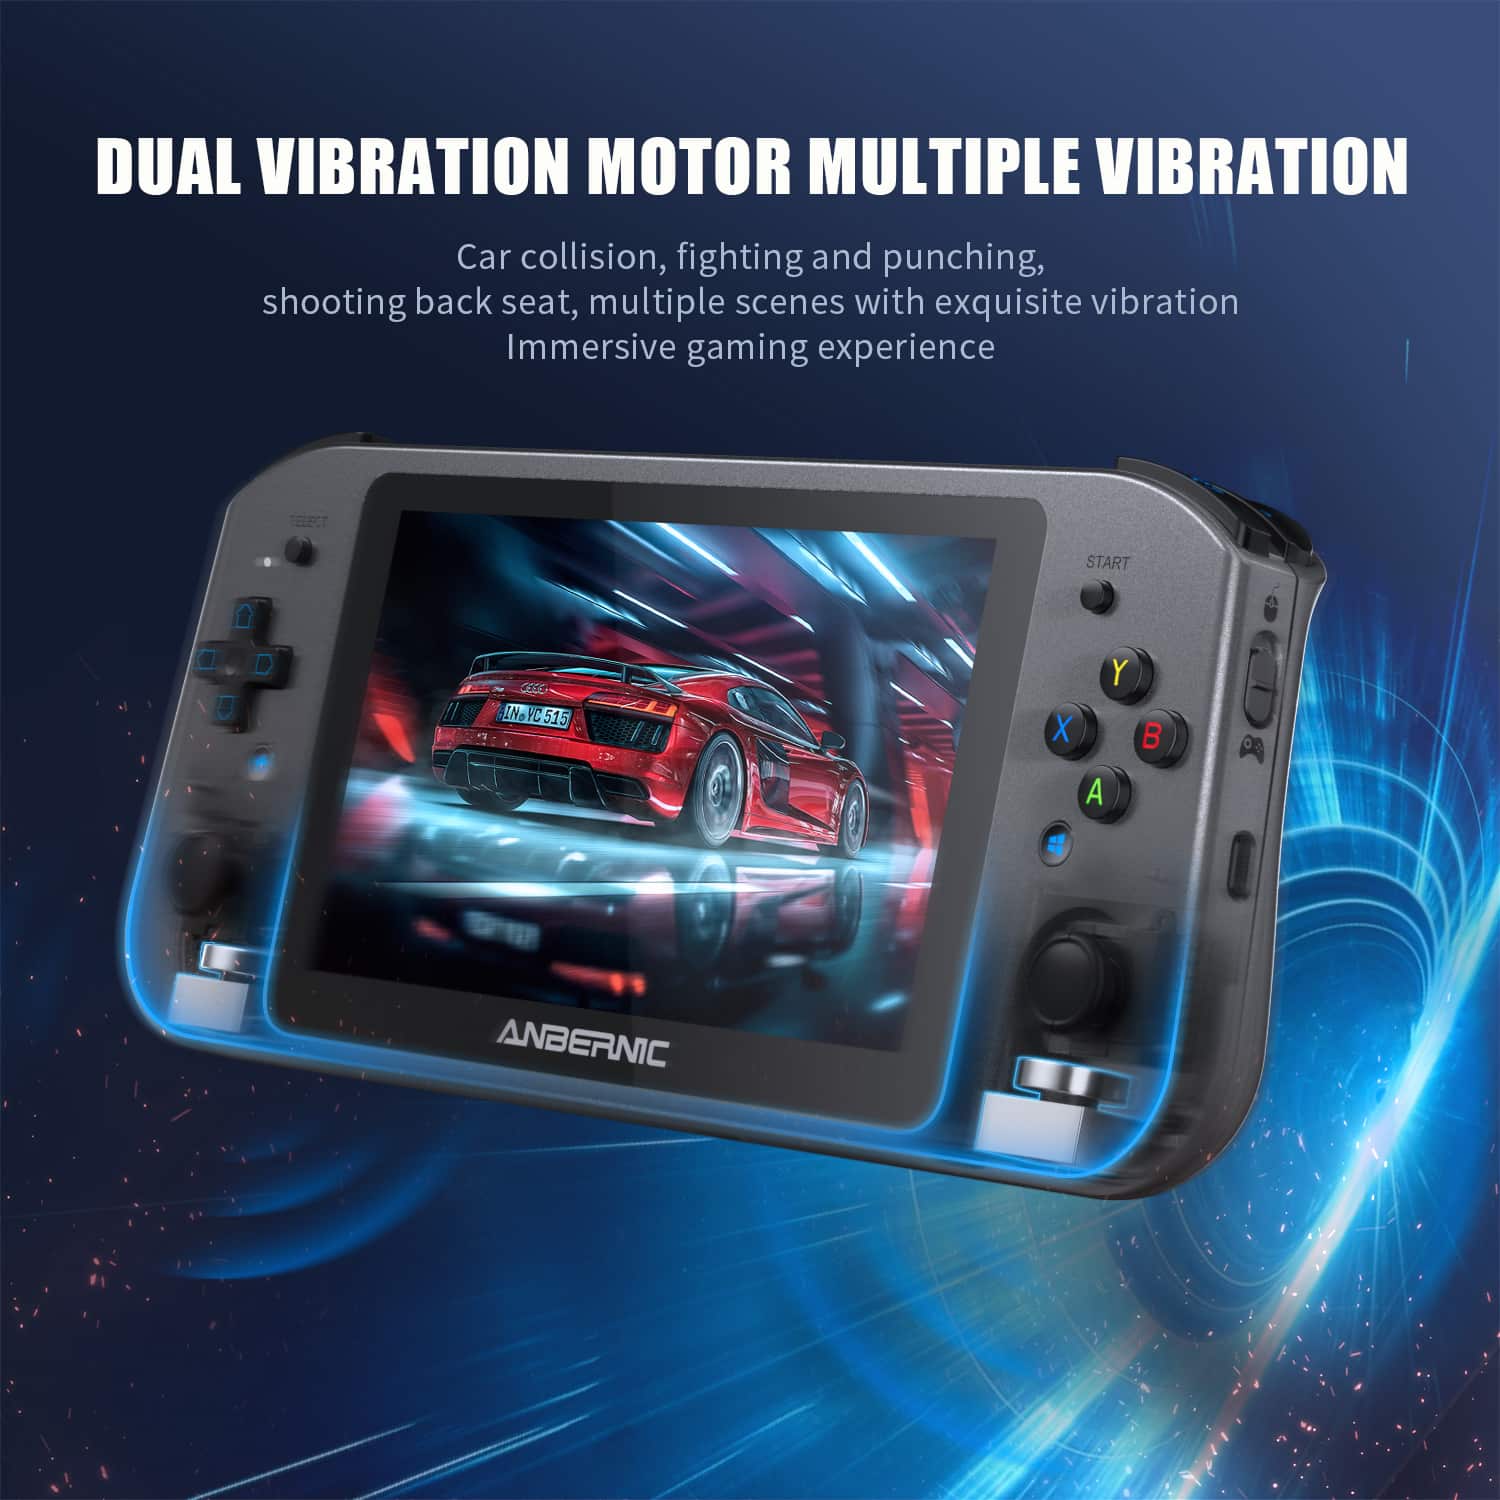 Win600 have dual vibration motor 